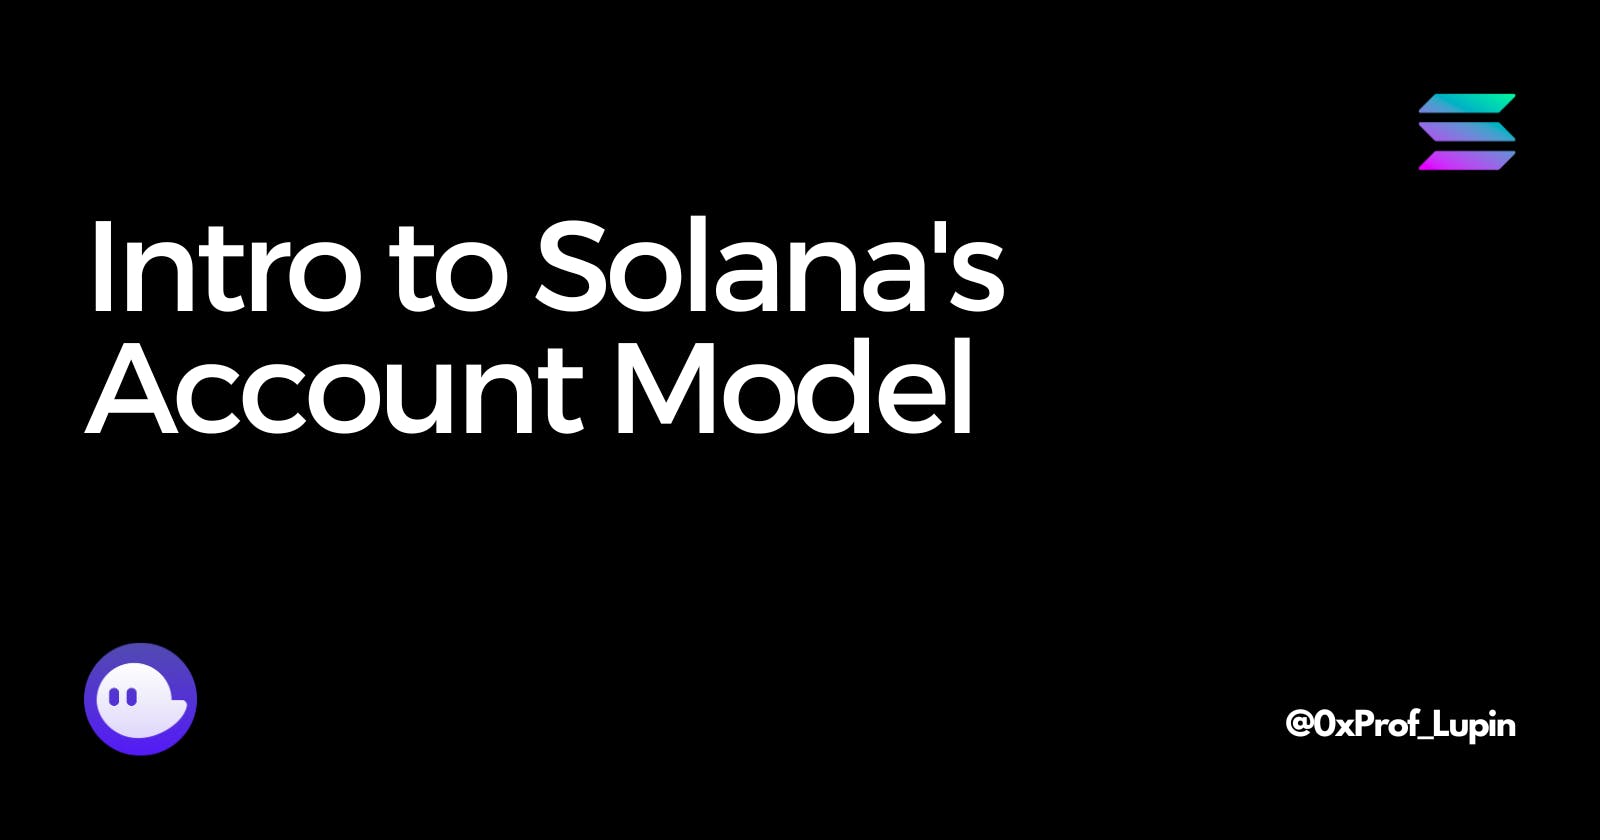 A dummy's guide to Solana's architecture